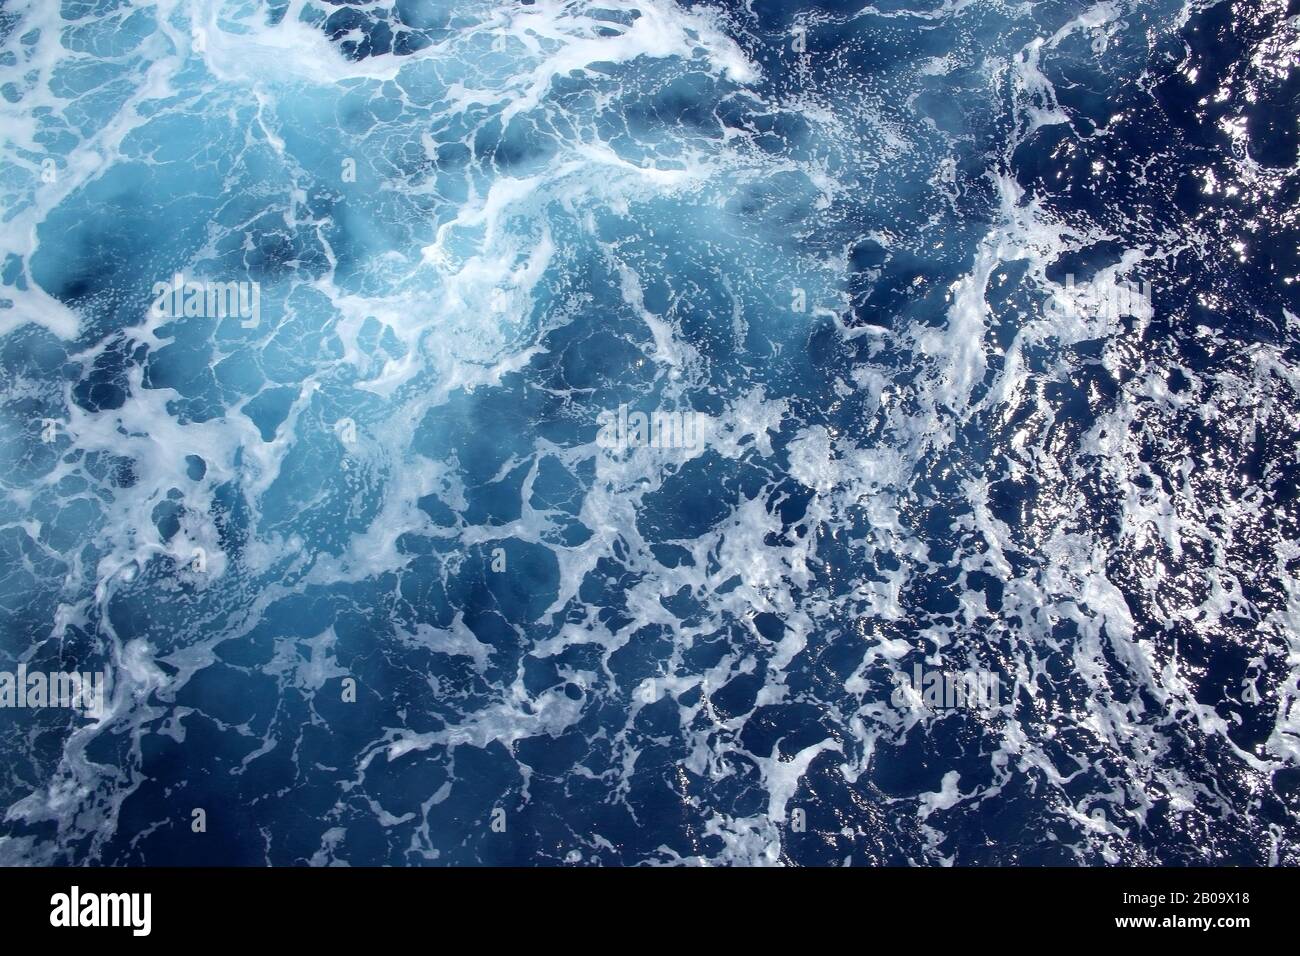 The ocean with swell & ripples of foam on the top, Atlantic. Stock Photo